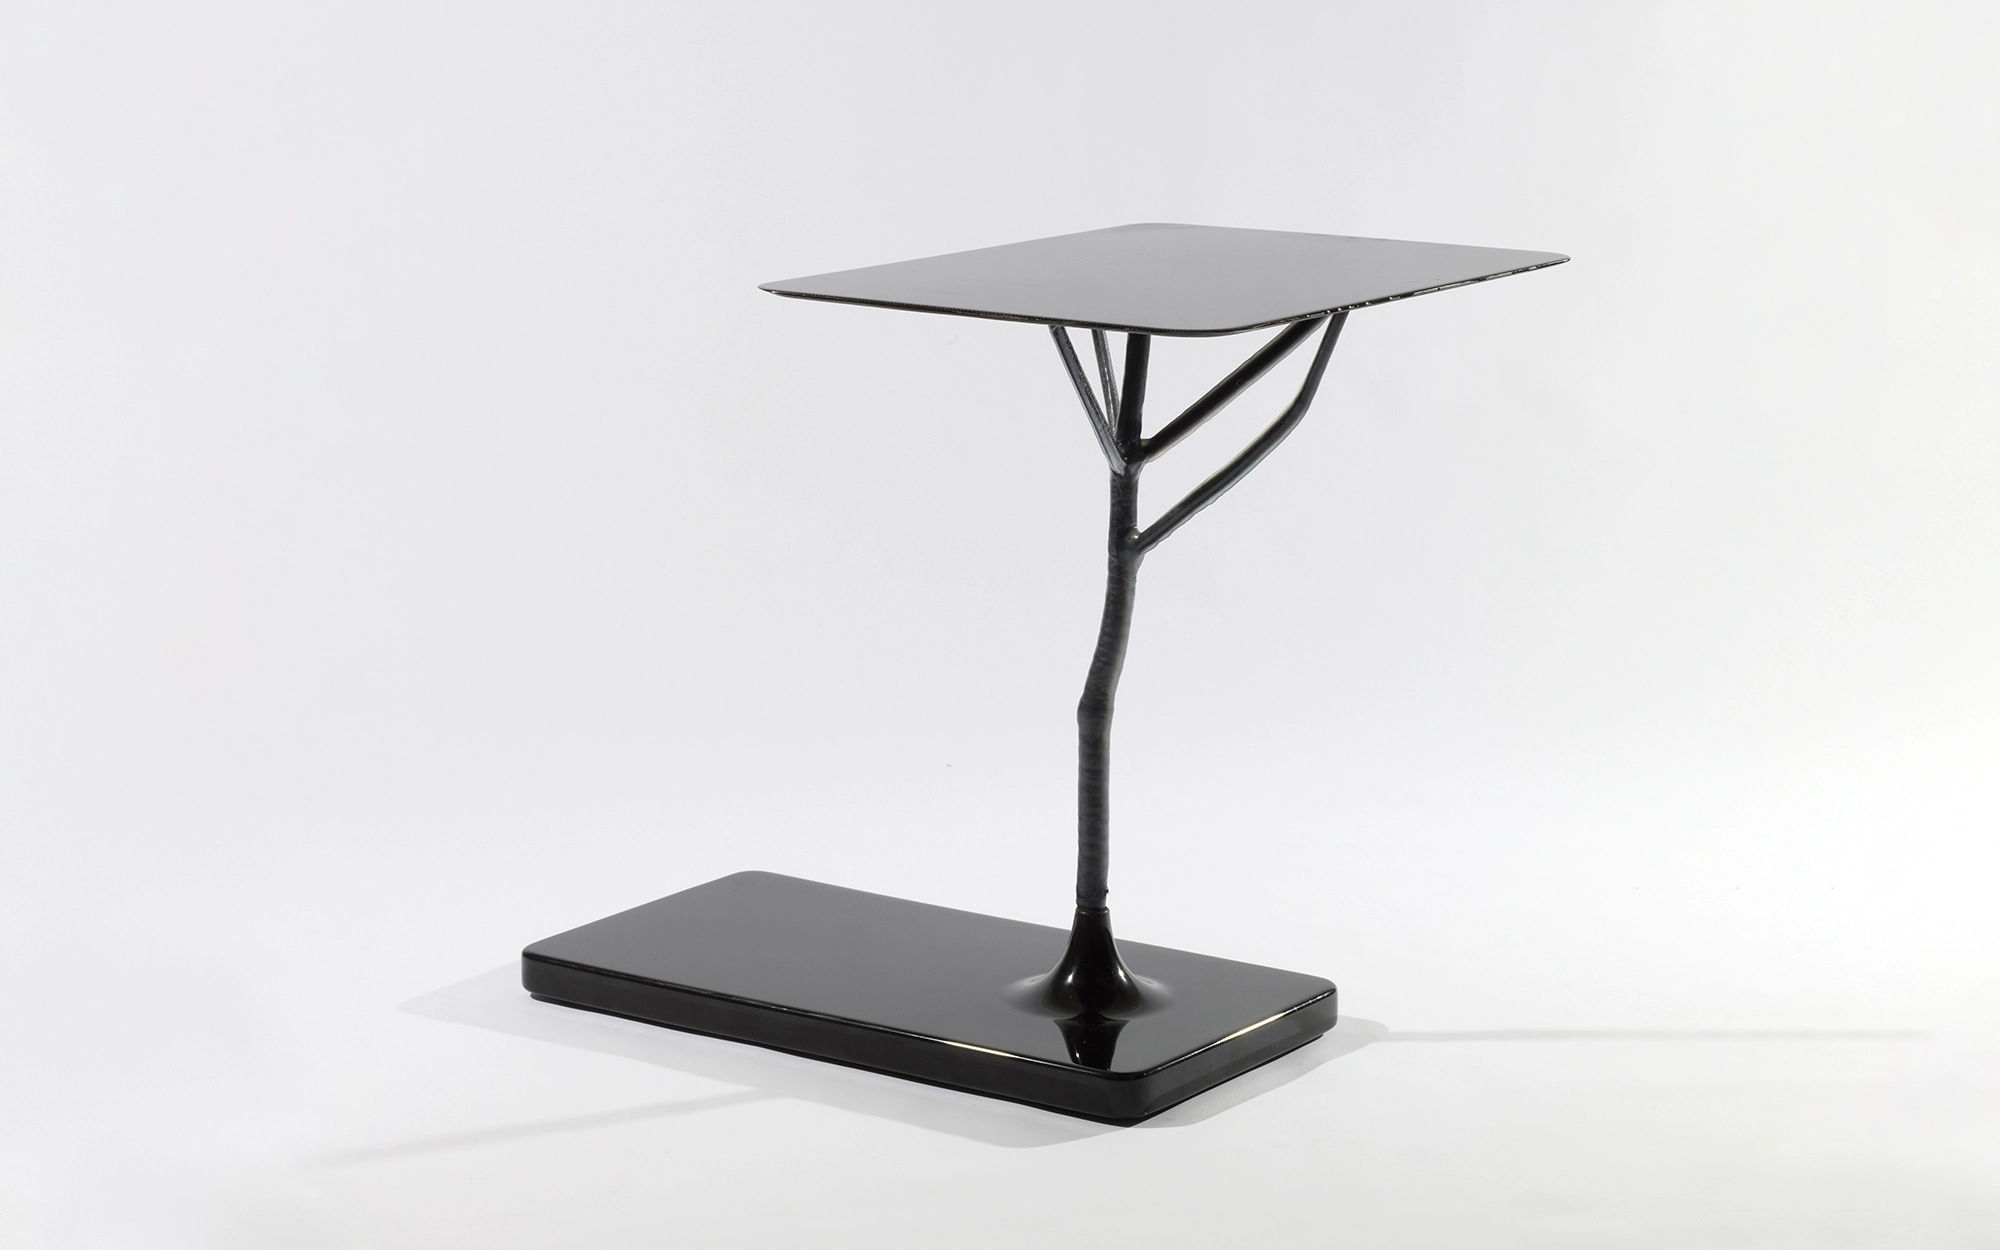 Frozen Hogweed Square Table - Studio Wieki Somers - Opération Contact.